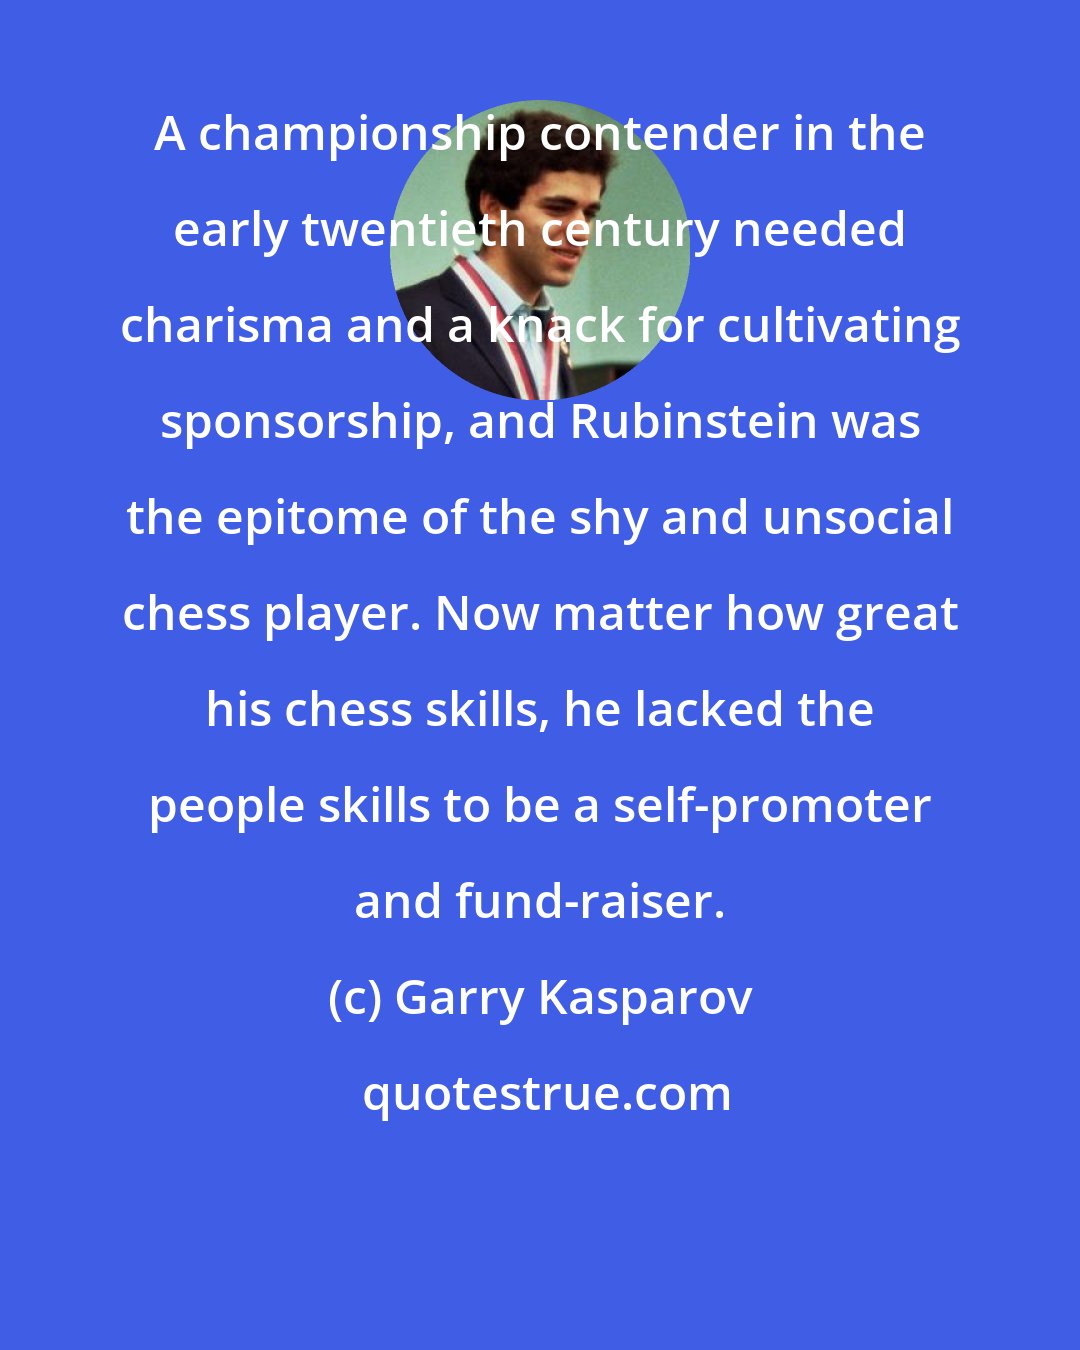 Garry Kasparov: A championship contender in the early twentieth century needed charisma and a knack for cultivating sponsorship, and Rubinstein was the epitome of the shy and unsocial chess player. Now matter how great his chess skills, he lacked the people skills to be a self-promoter and fund-raiser.